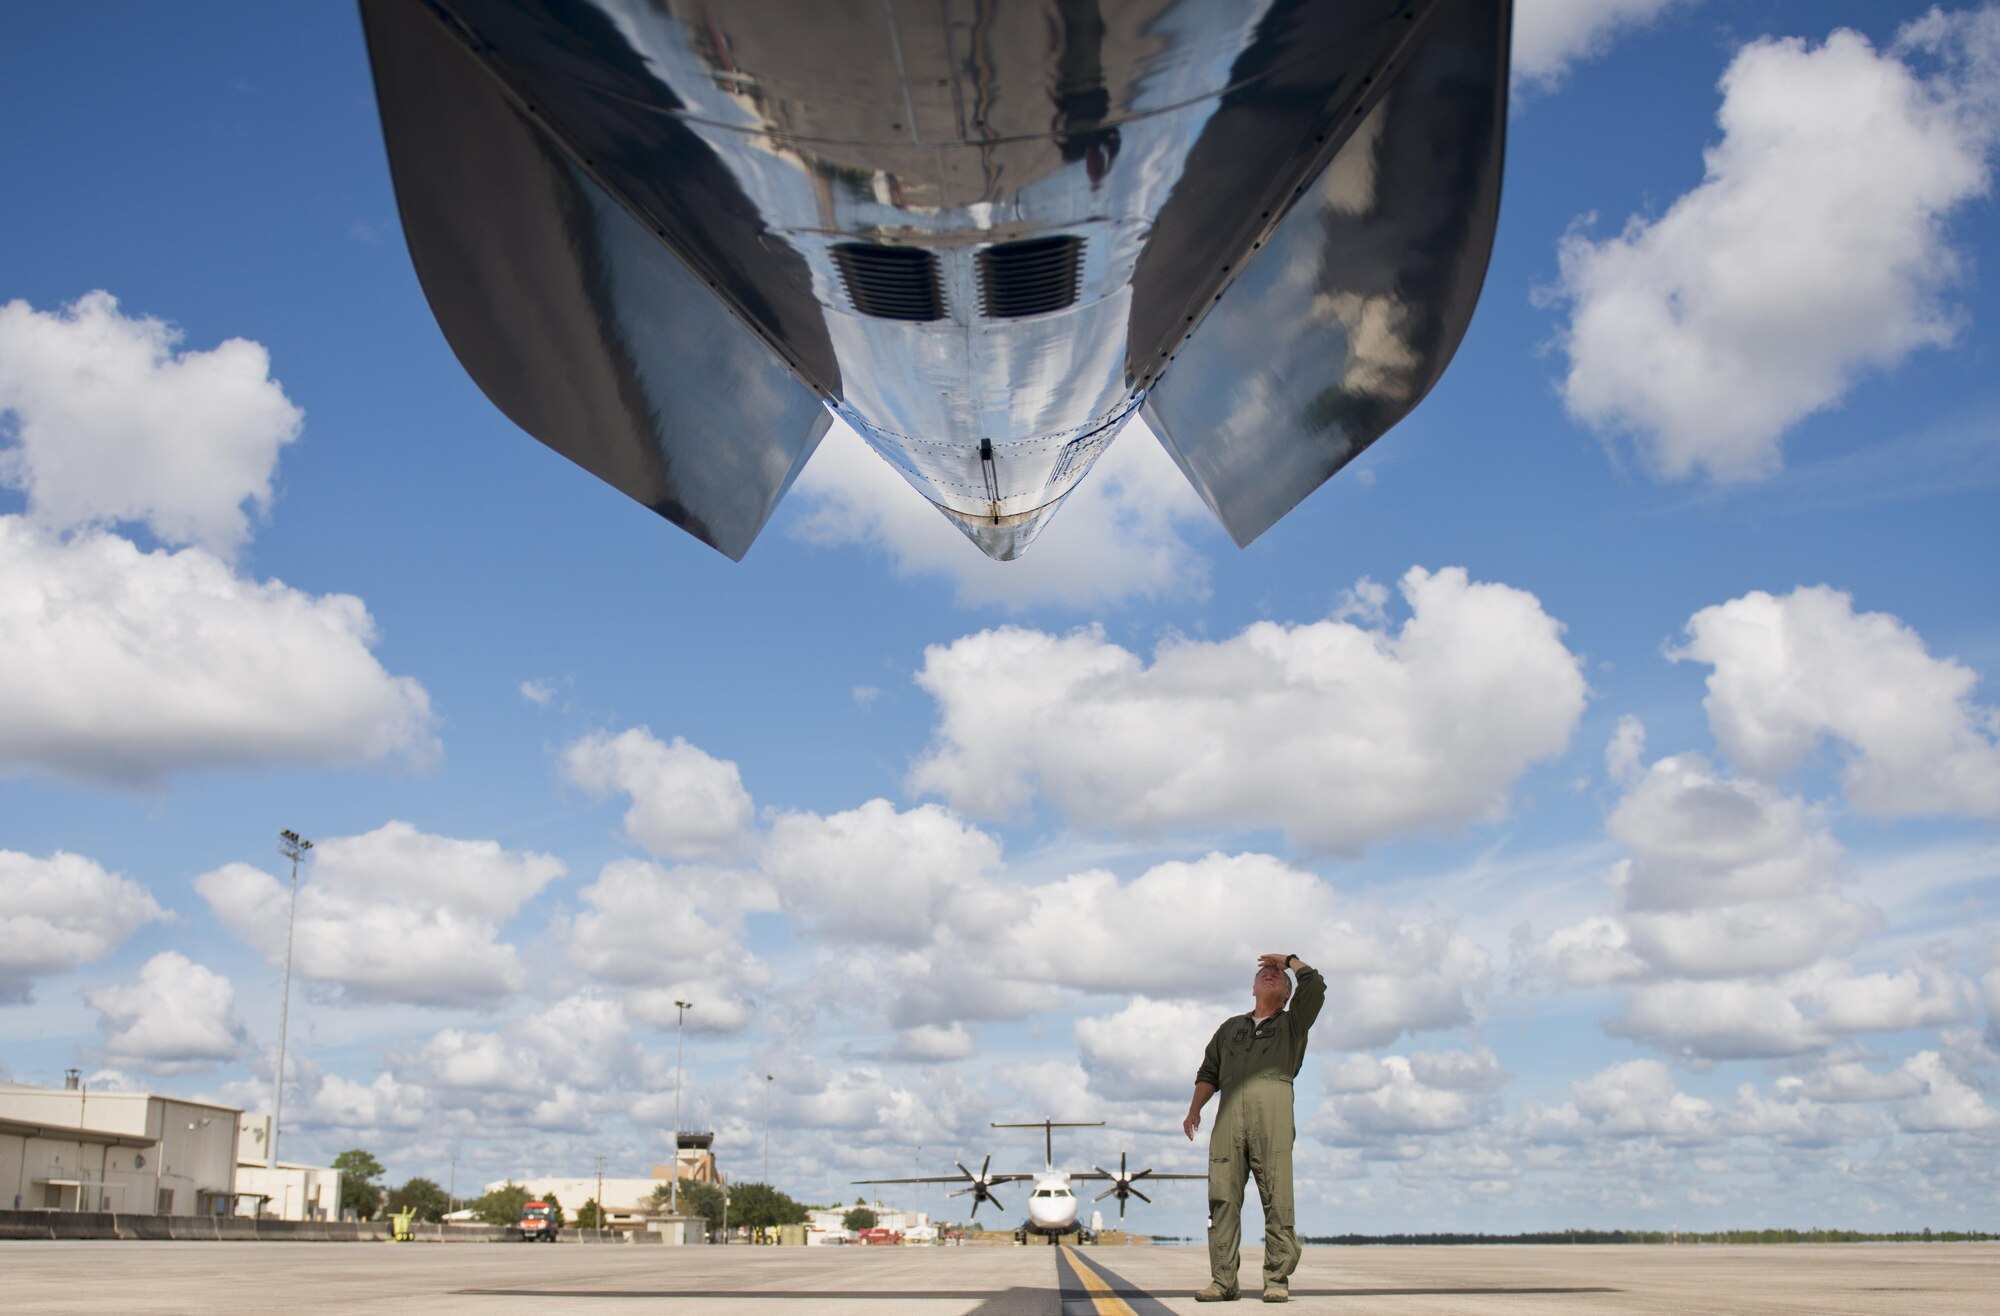 Lt. Col. Michael Theriot, 711th Special Operations Squadron, completes his postflight checks on a C-146 Wolfhound at Duke Field, Fla., Oct. 21.  The Air Force Special Operations Wing aircraft are used specifically in the training and operation of the 919th Special Operations Wing’s nonstandard aviation mission.  (U.S. Air Force photo/Tech. Sgt. Sam King)